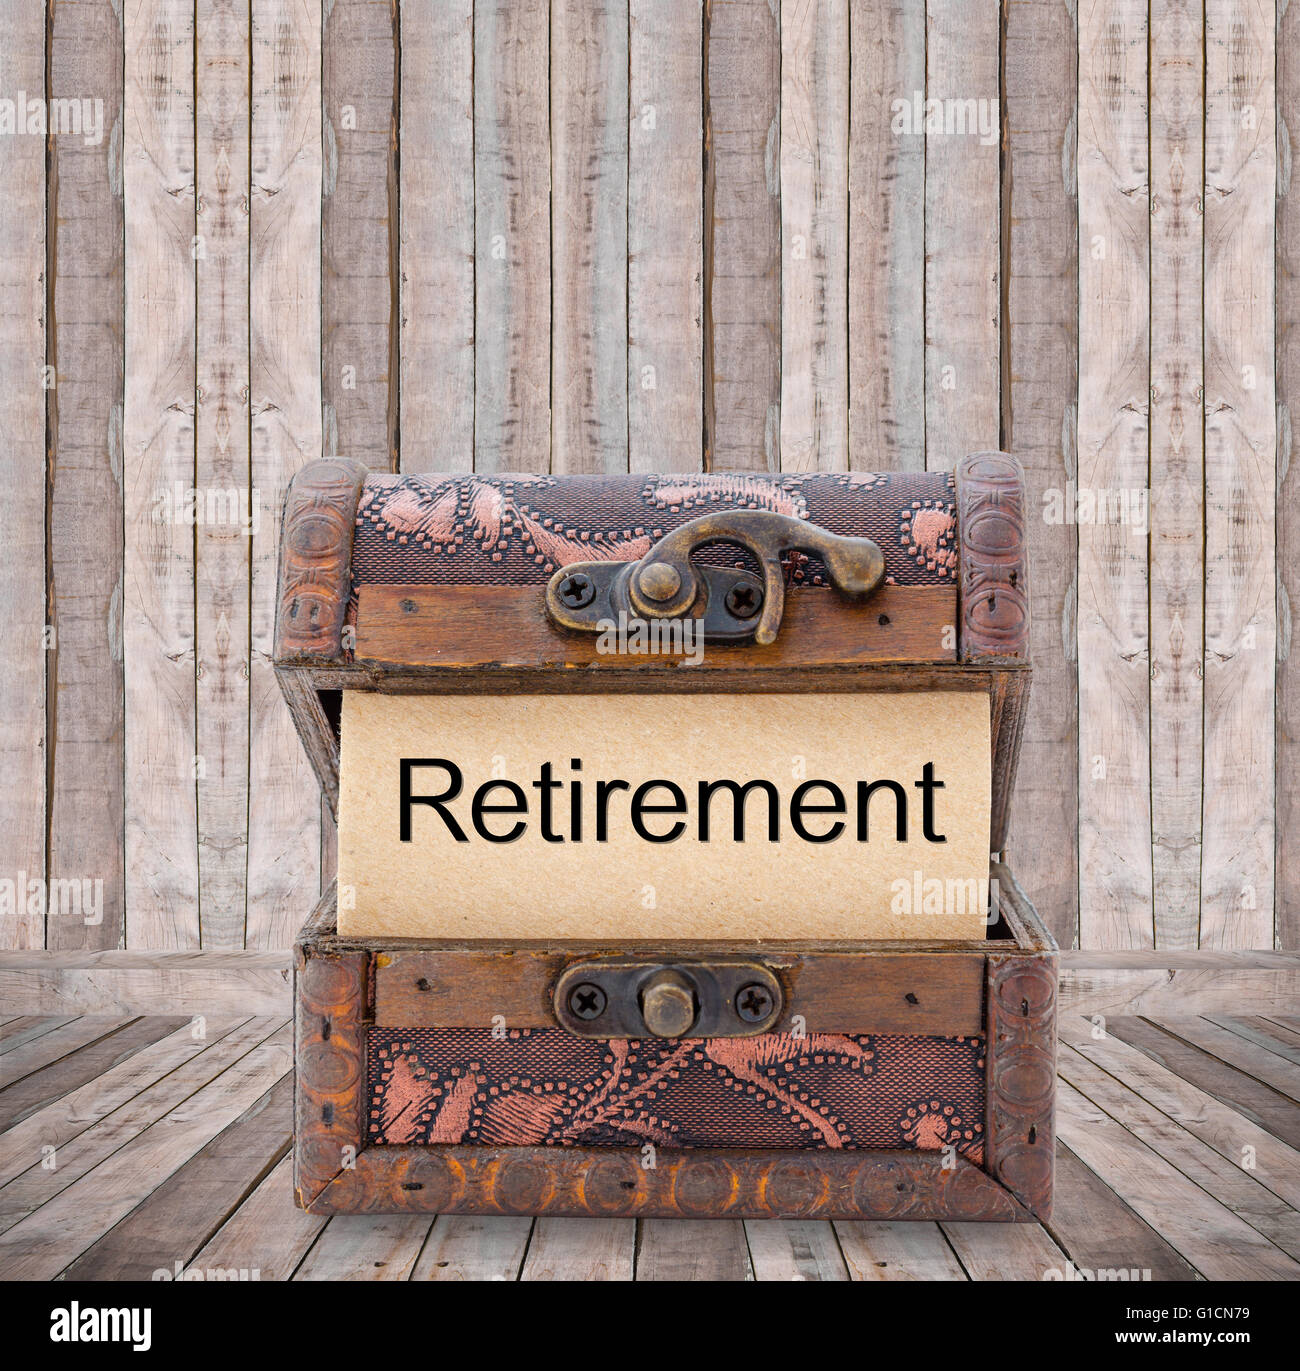 Retirement word on paper in treasure chest on wooden room. Stock Photo